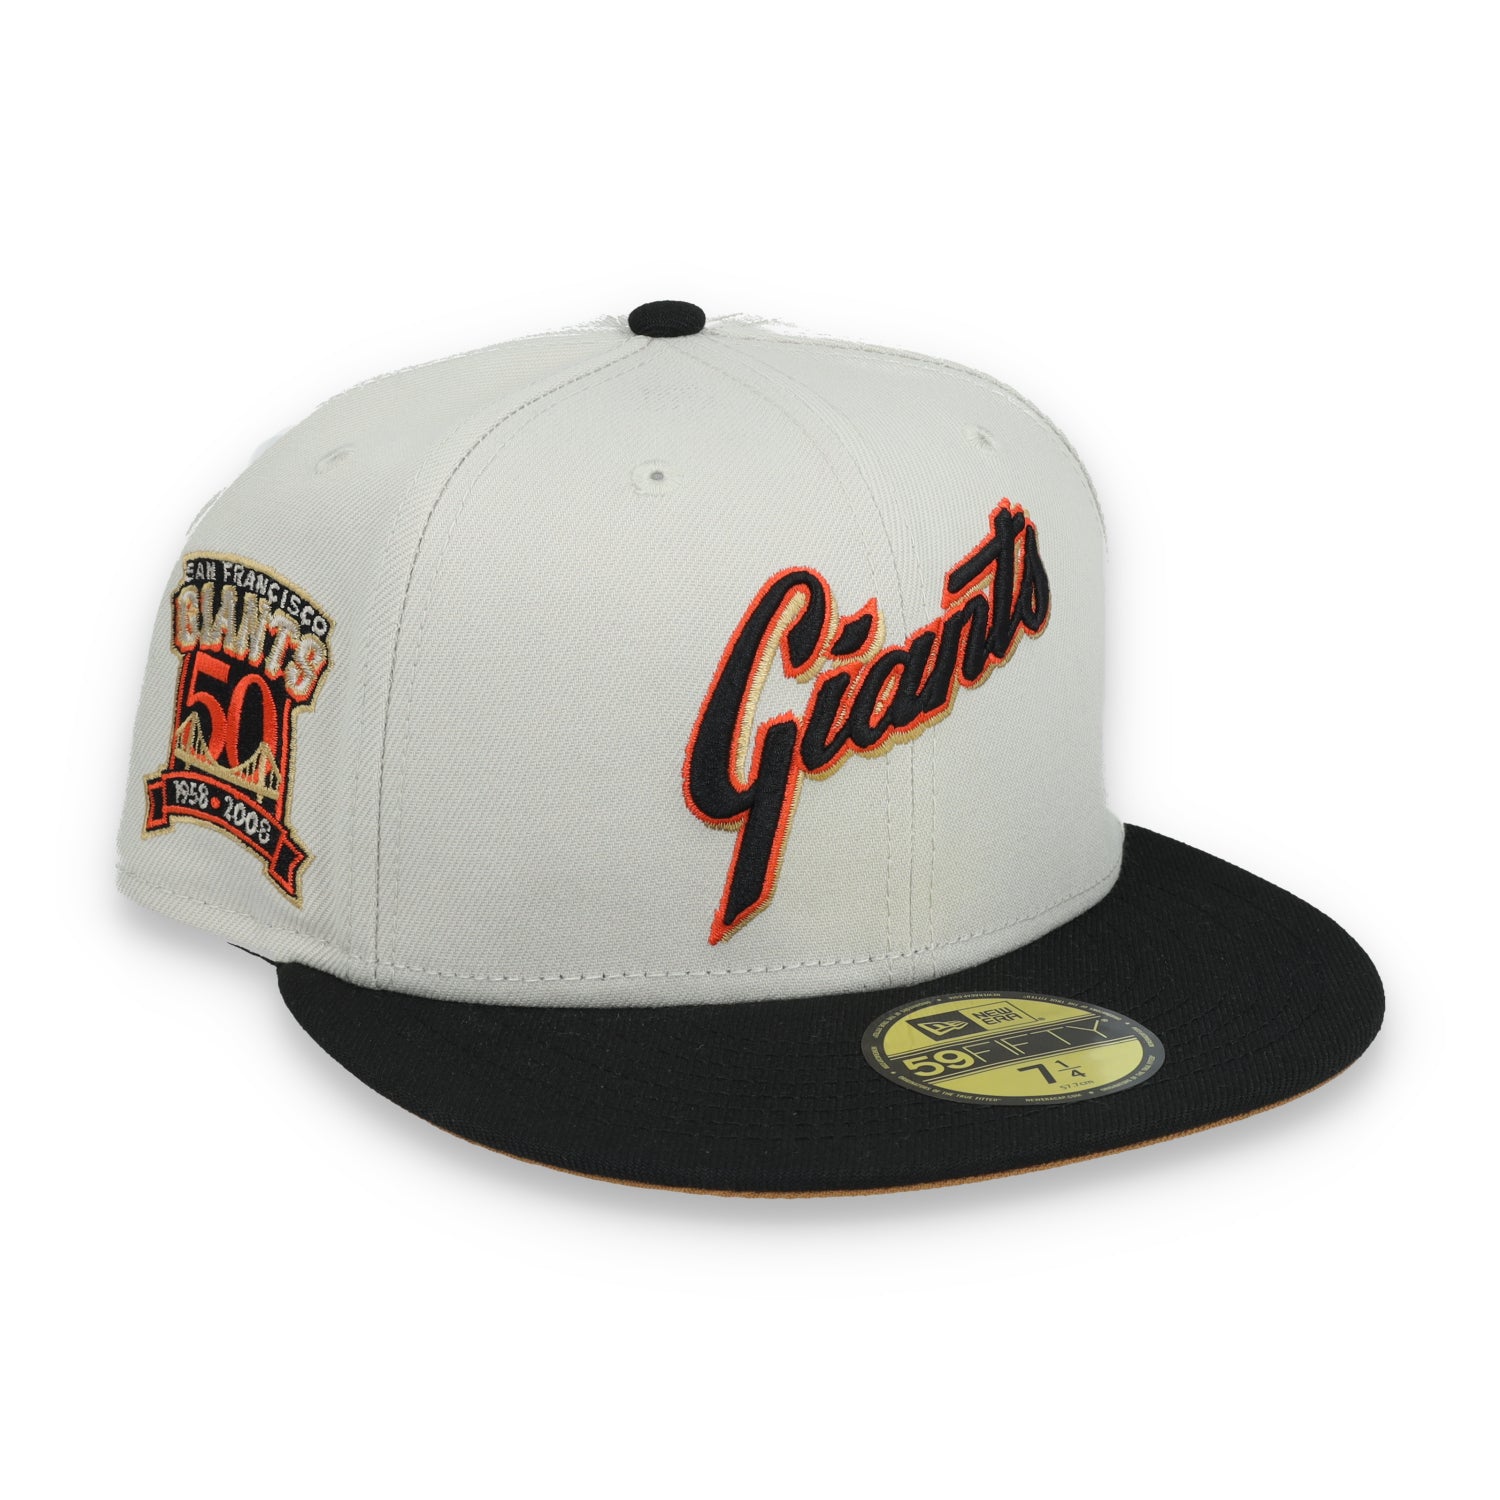 New Era San Francisco Giants 50th Anniversary Side Patch 59IFTY Fitted hat- Chrome